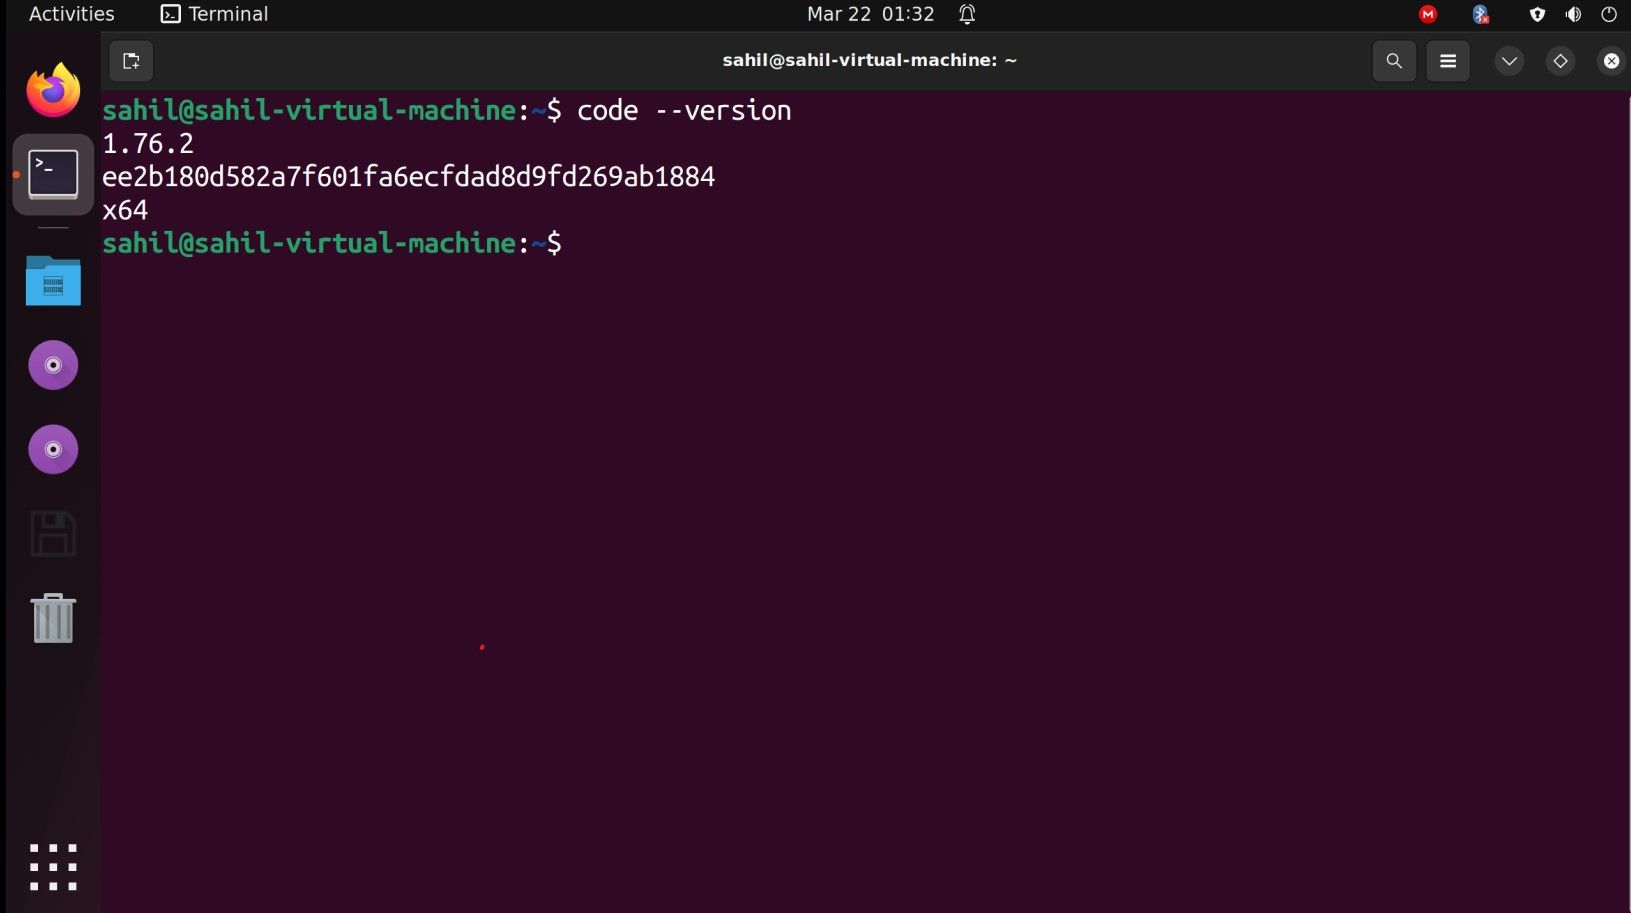 Ubuntu terminal window with code snippets to check software version